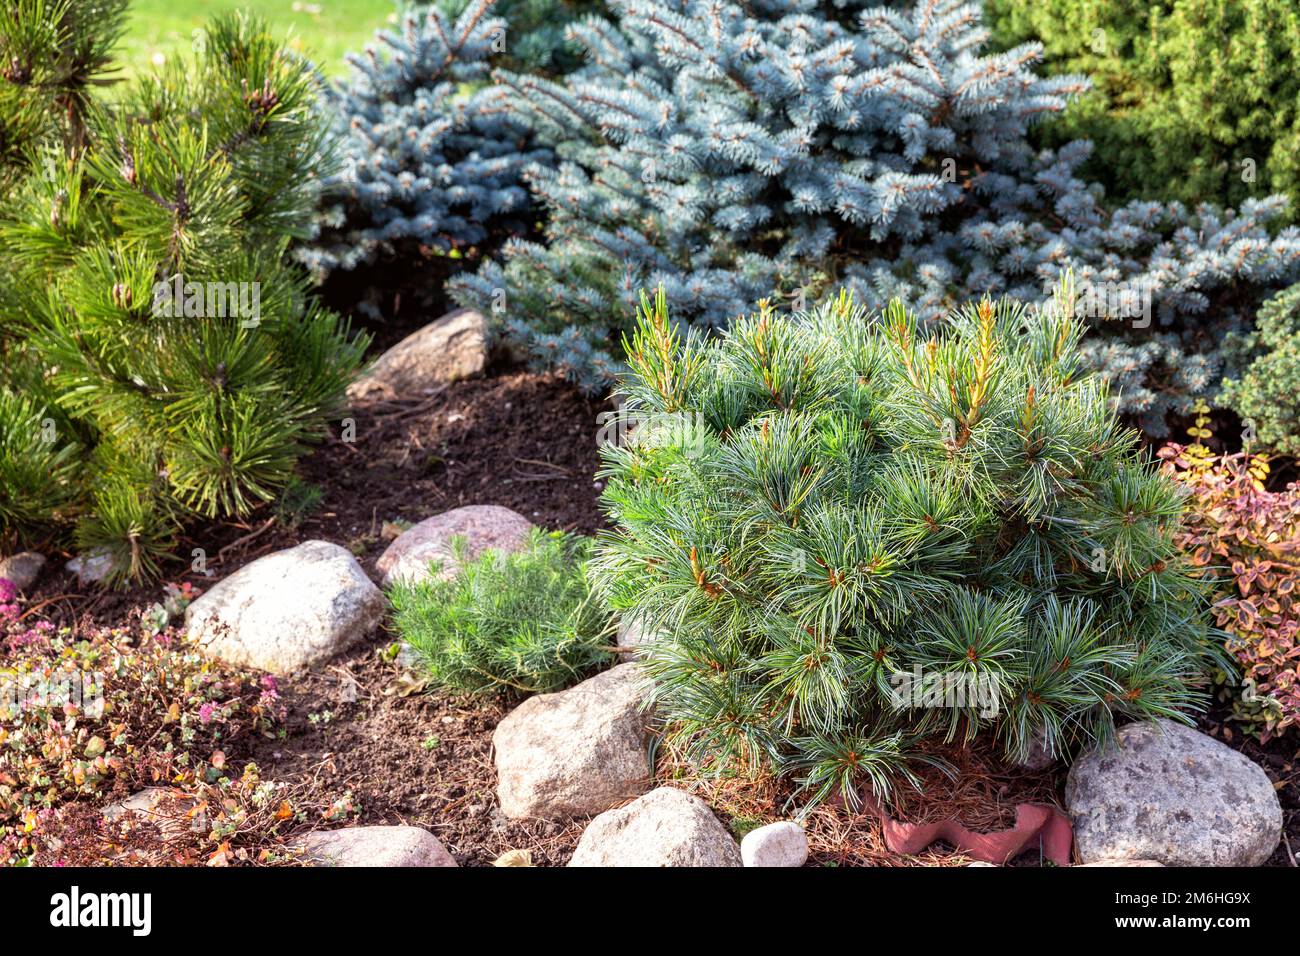 Dwarf pine in the garden among conifers of different species and different colors Stock Photo